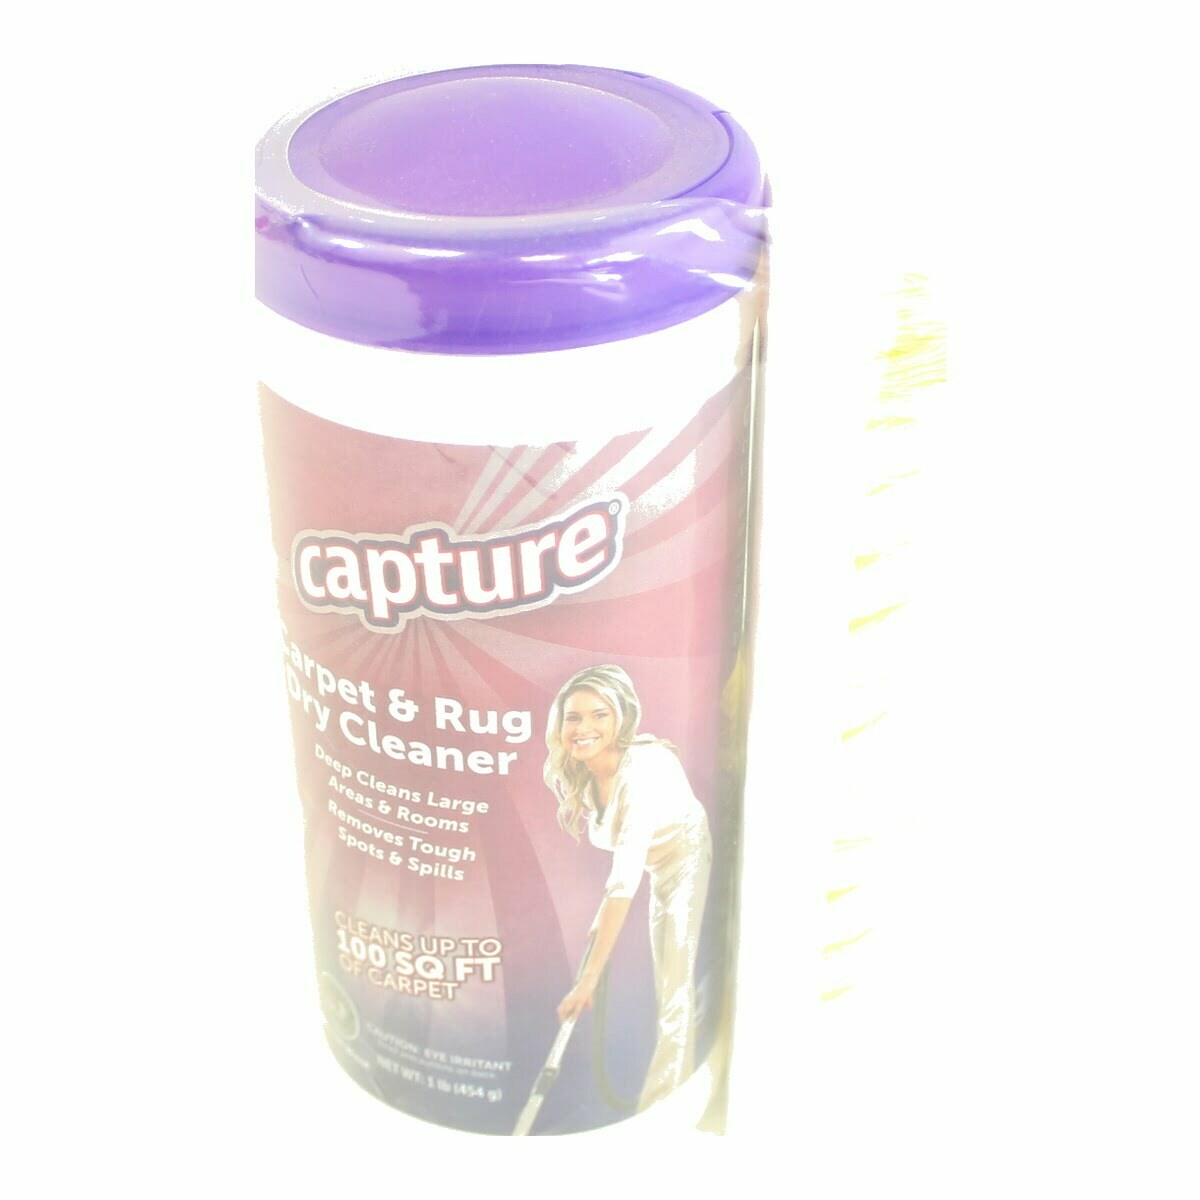 Deep Cleaning Powder - Capture Dry Carpet & Rug Cleaner